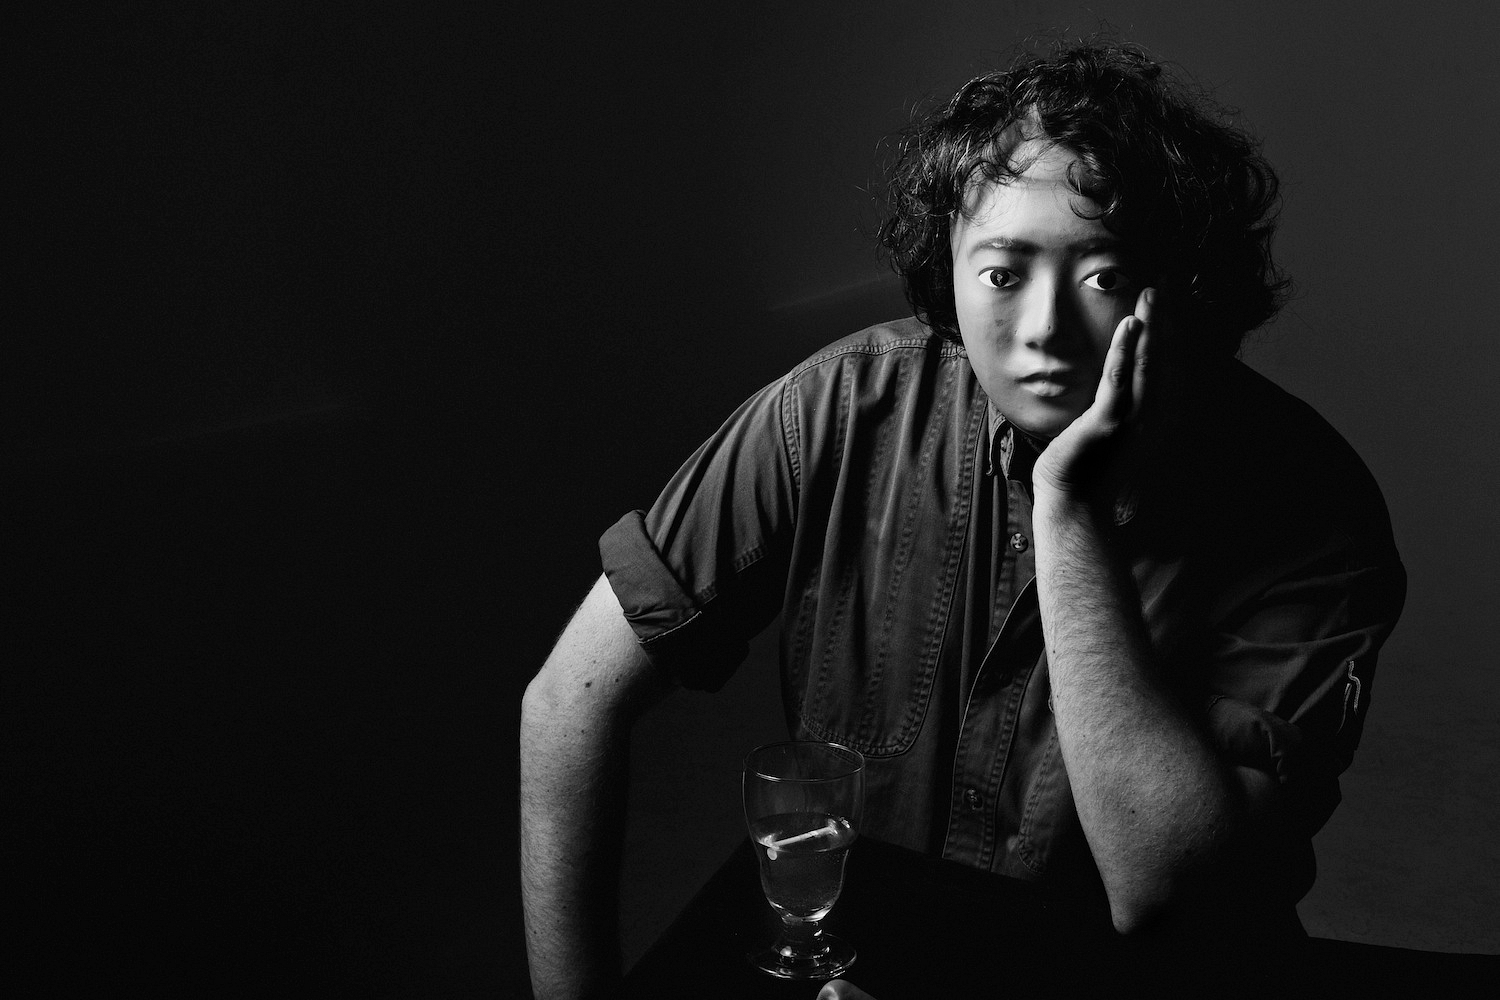 Oneohtrix Point Never previews new album with ‘Mutant Standard’